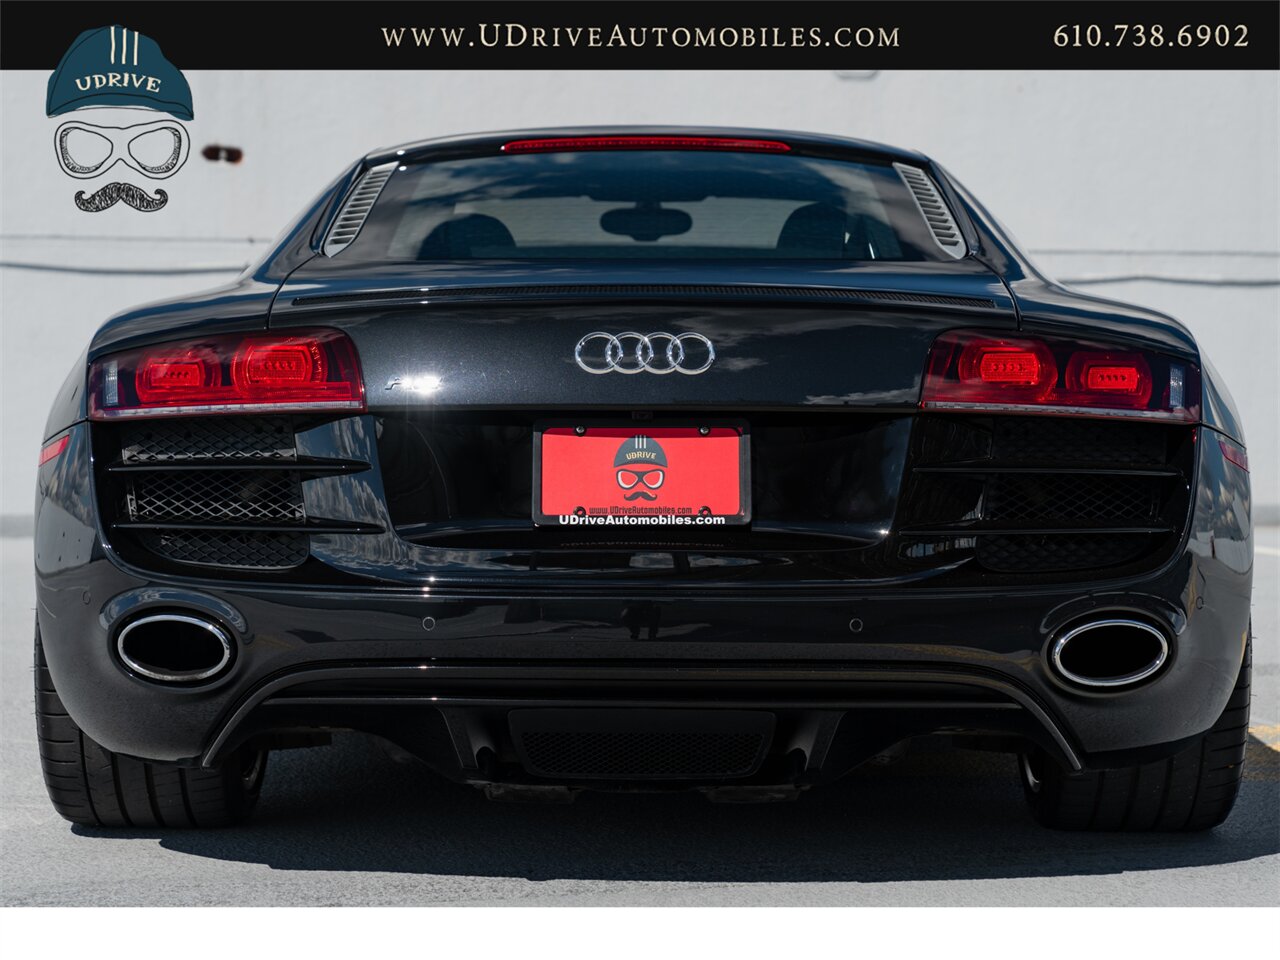 2011 Audi R8 5.2 Quattro  V10 6 Speed Manual - Photo 21 - West Chester, PA 19382